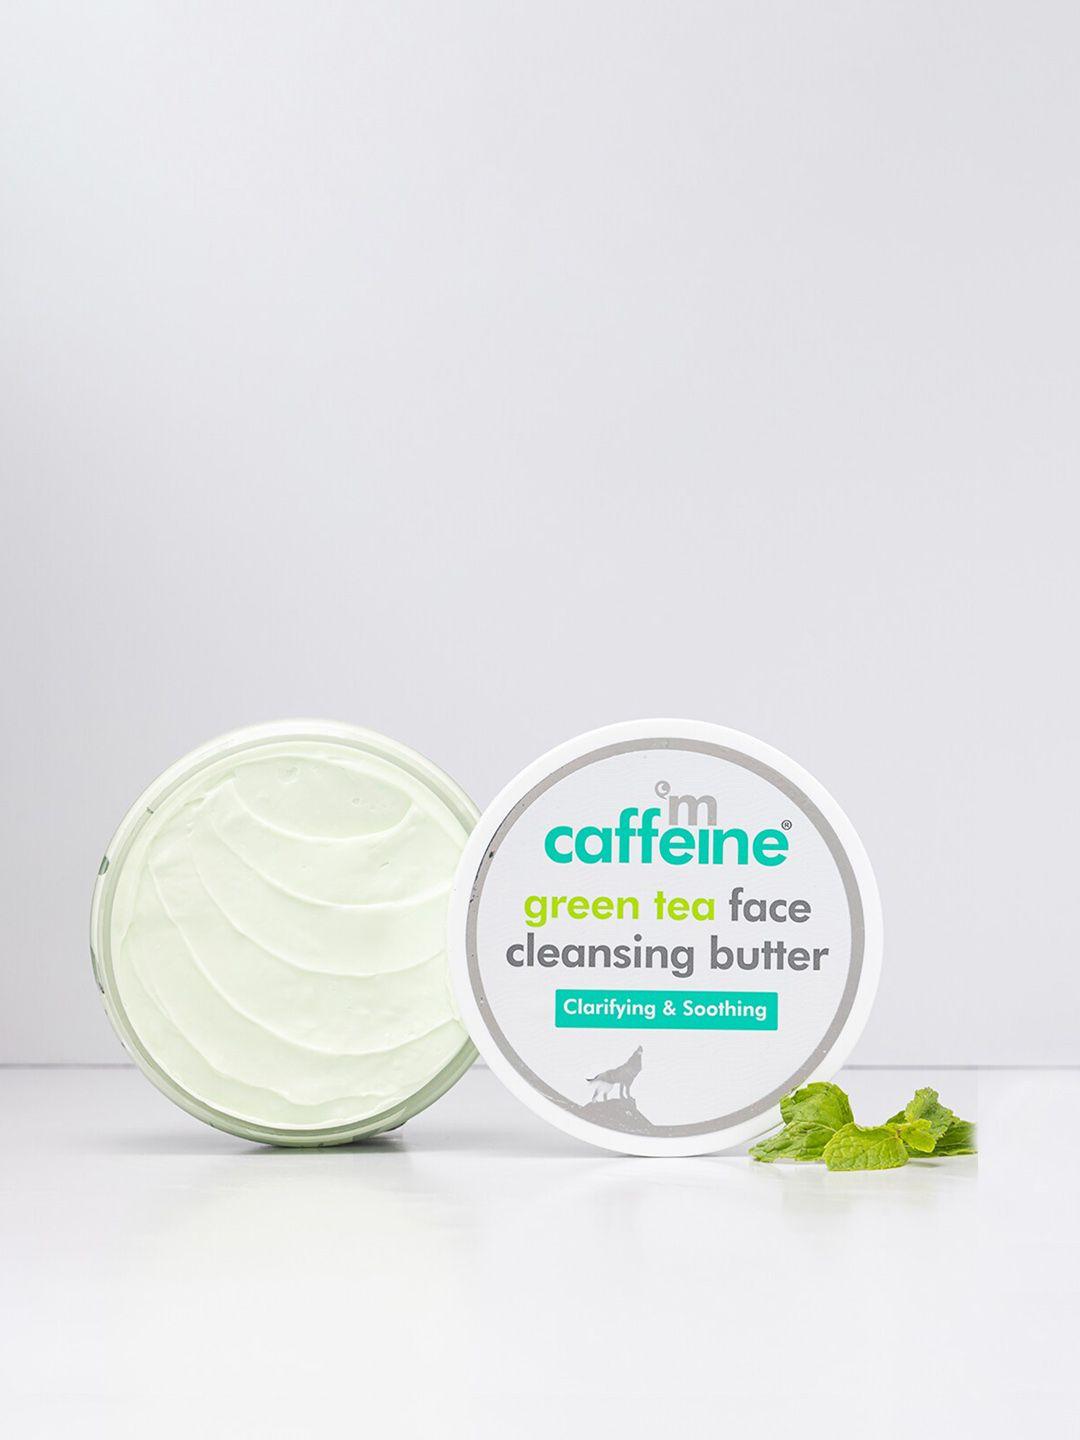 mcaffeine green tea face cleansing butter for clarifying & smoothening 100 g